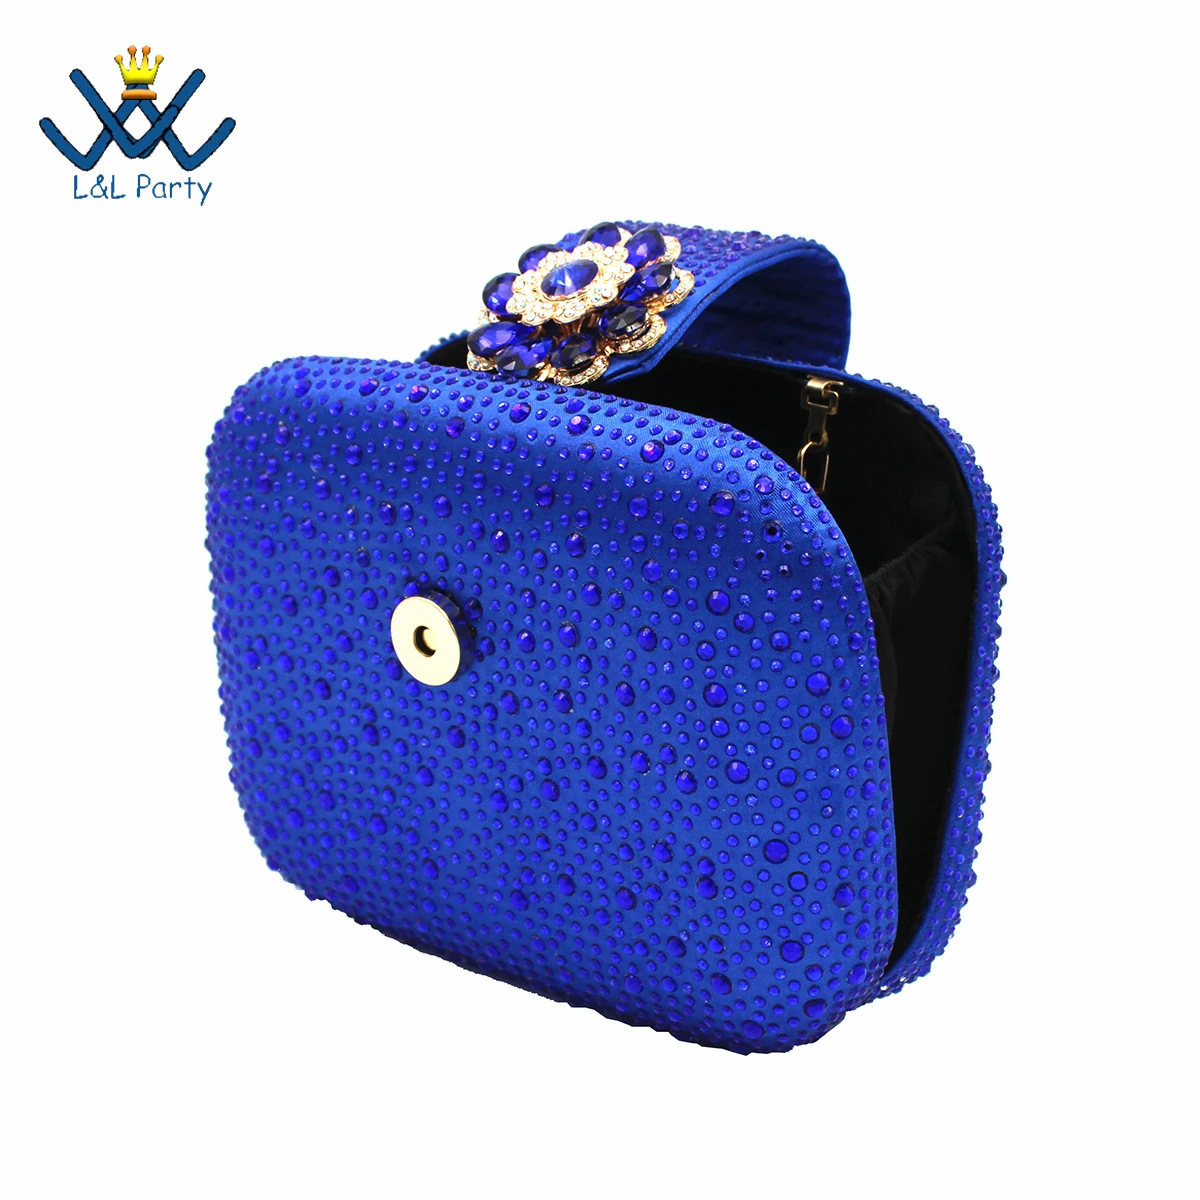 

Royal Blue Color Nigerian Women Classics Style Hand Bag Spring New Arrivals Fashion African Ladies Bag for Party